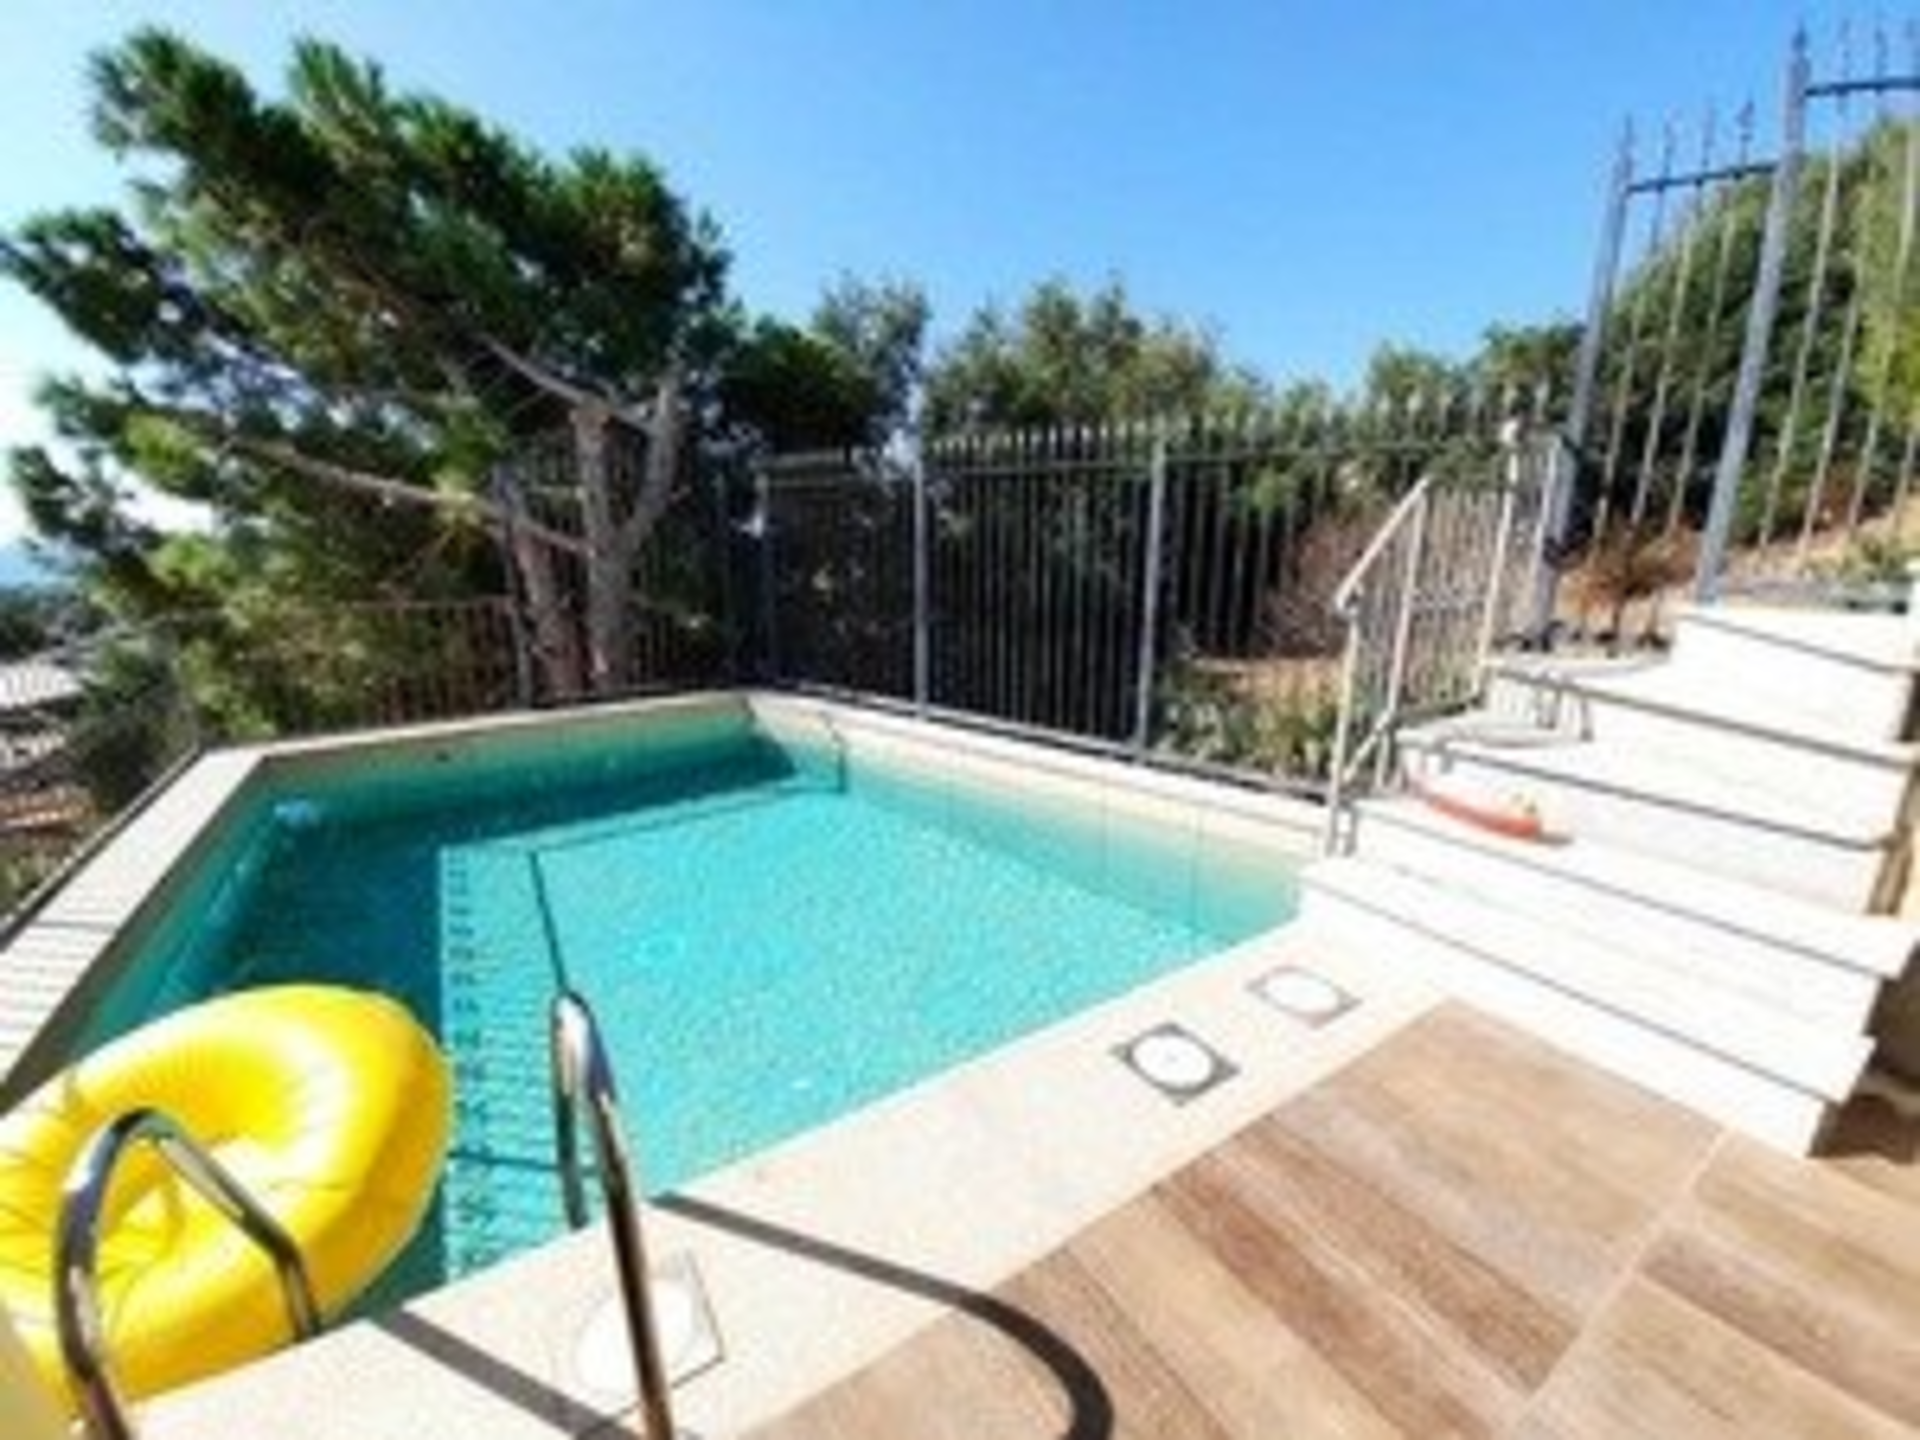 Villas in Sardinia with Pool to Book for Luxurious Holiday Experience  | sardiniaholiday